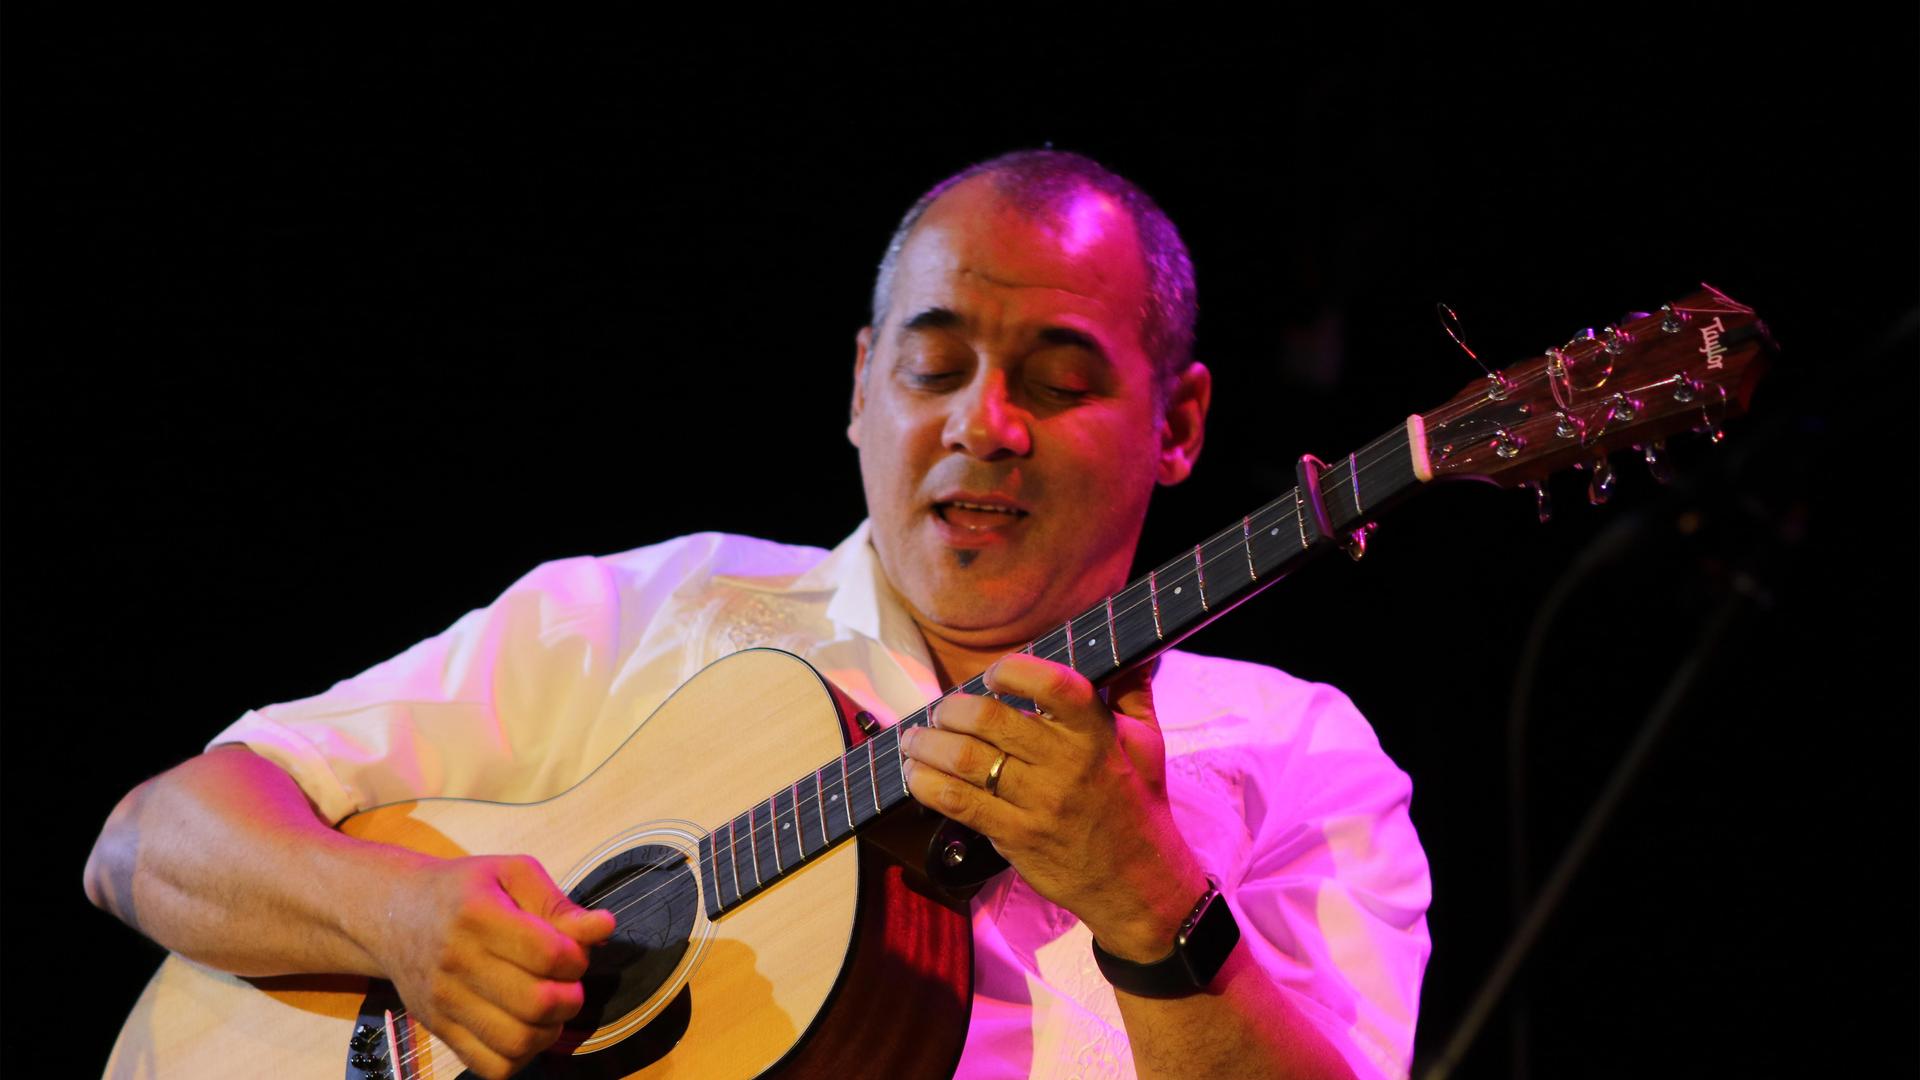 Enrique Kiki Valera is a multi-instrumentalist, composer, arranger, sound engineer and producer. He’s best known as one of the world’s greatest players of the Cuban cuatro, a mid-size guitar with eight strings grouped in sets of two. 